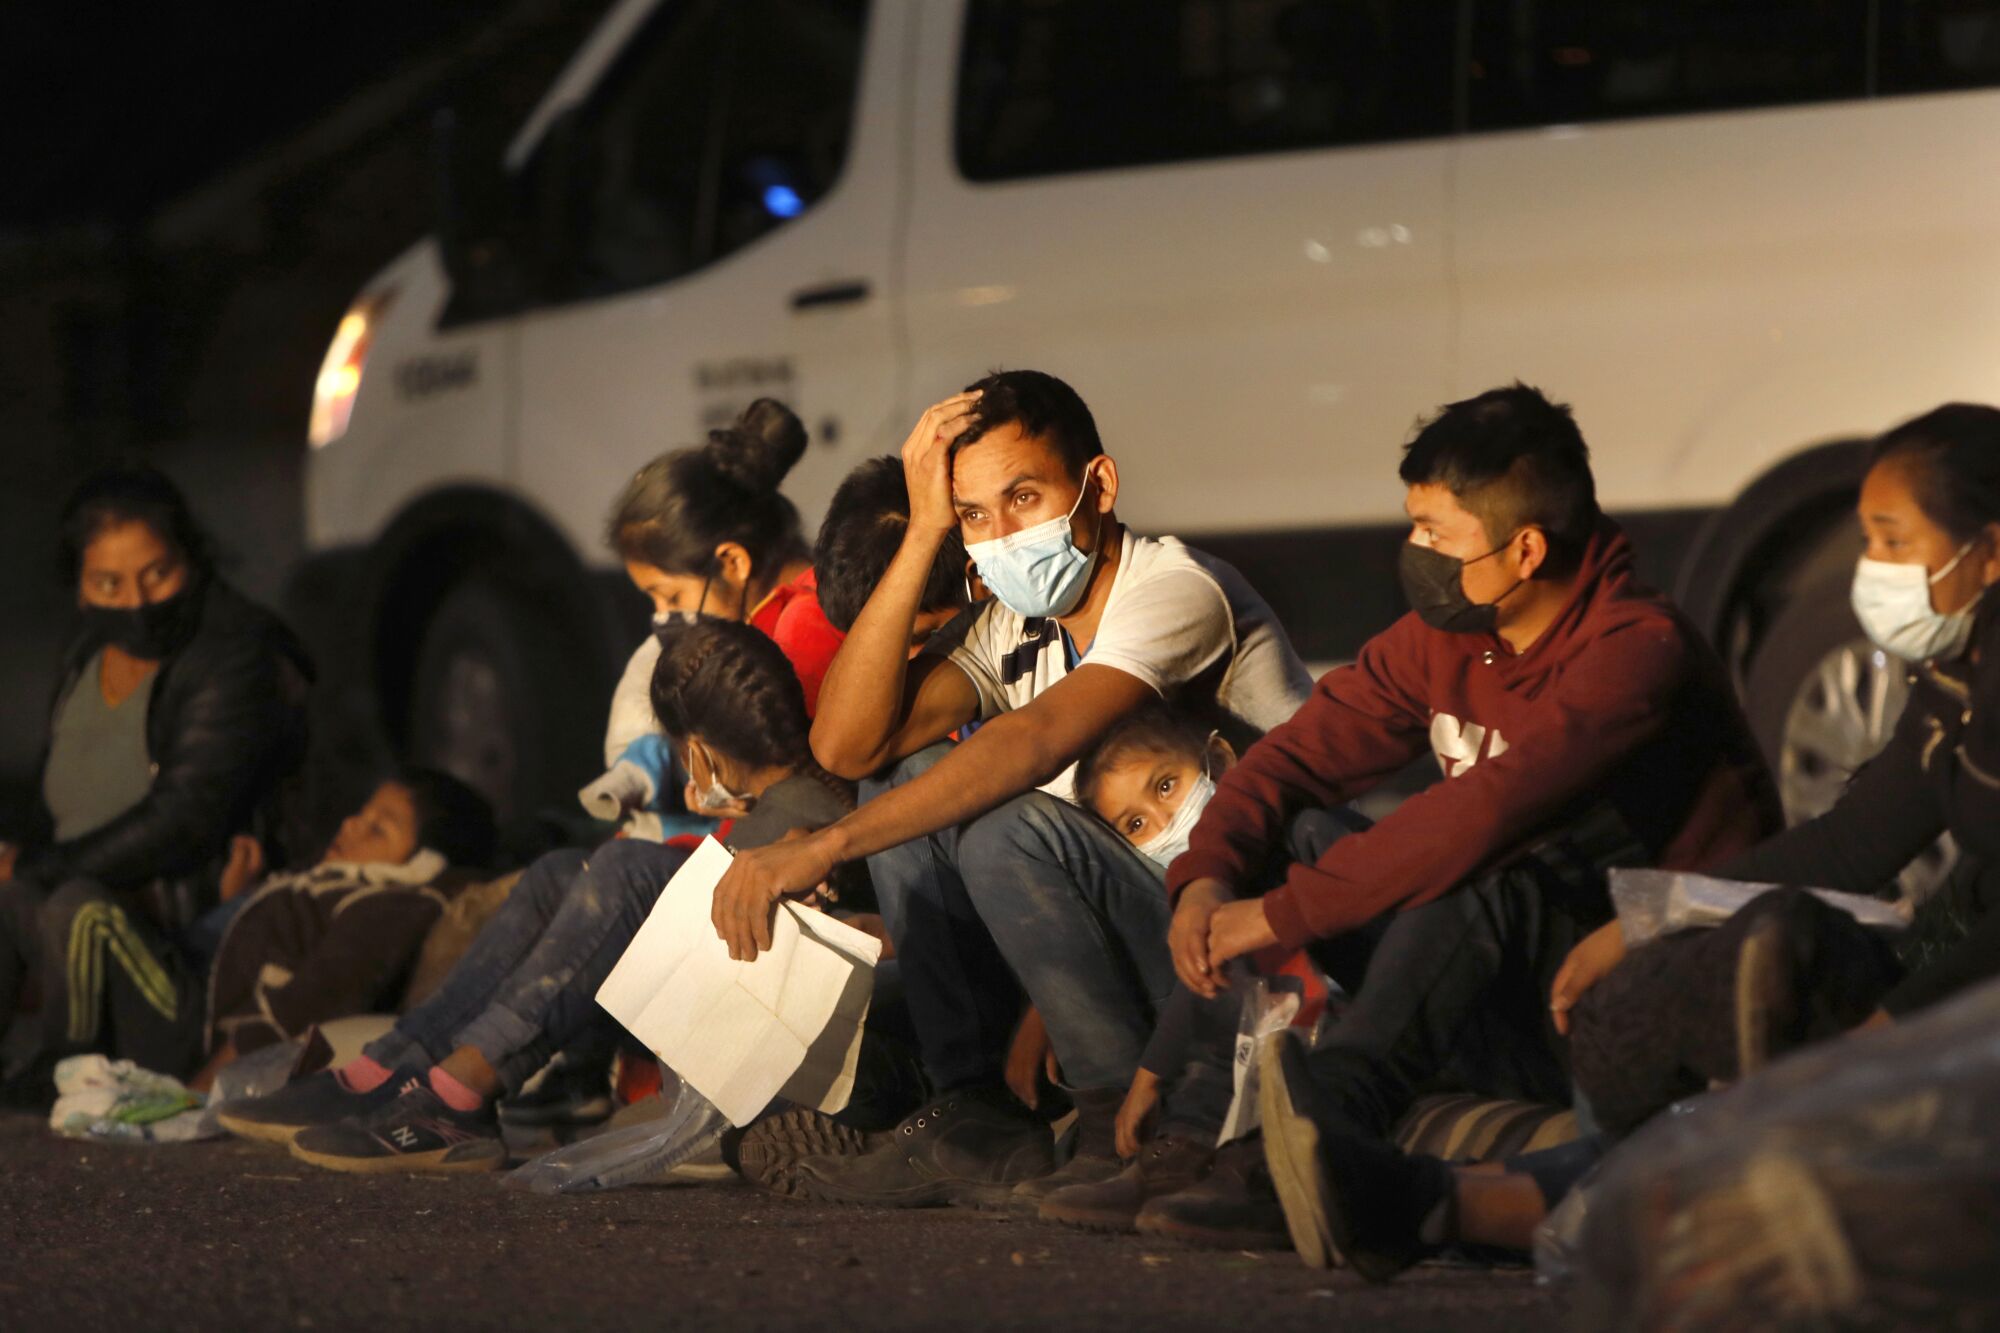 A group of migrant adults and children sit on the ground next to a van at night